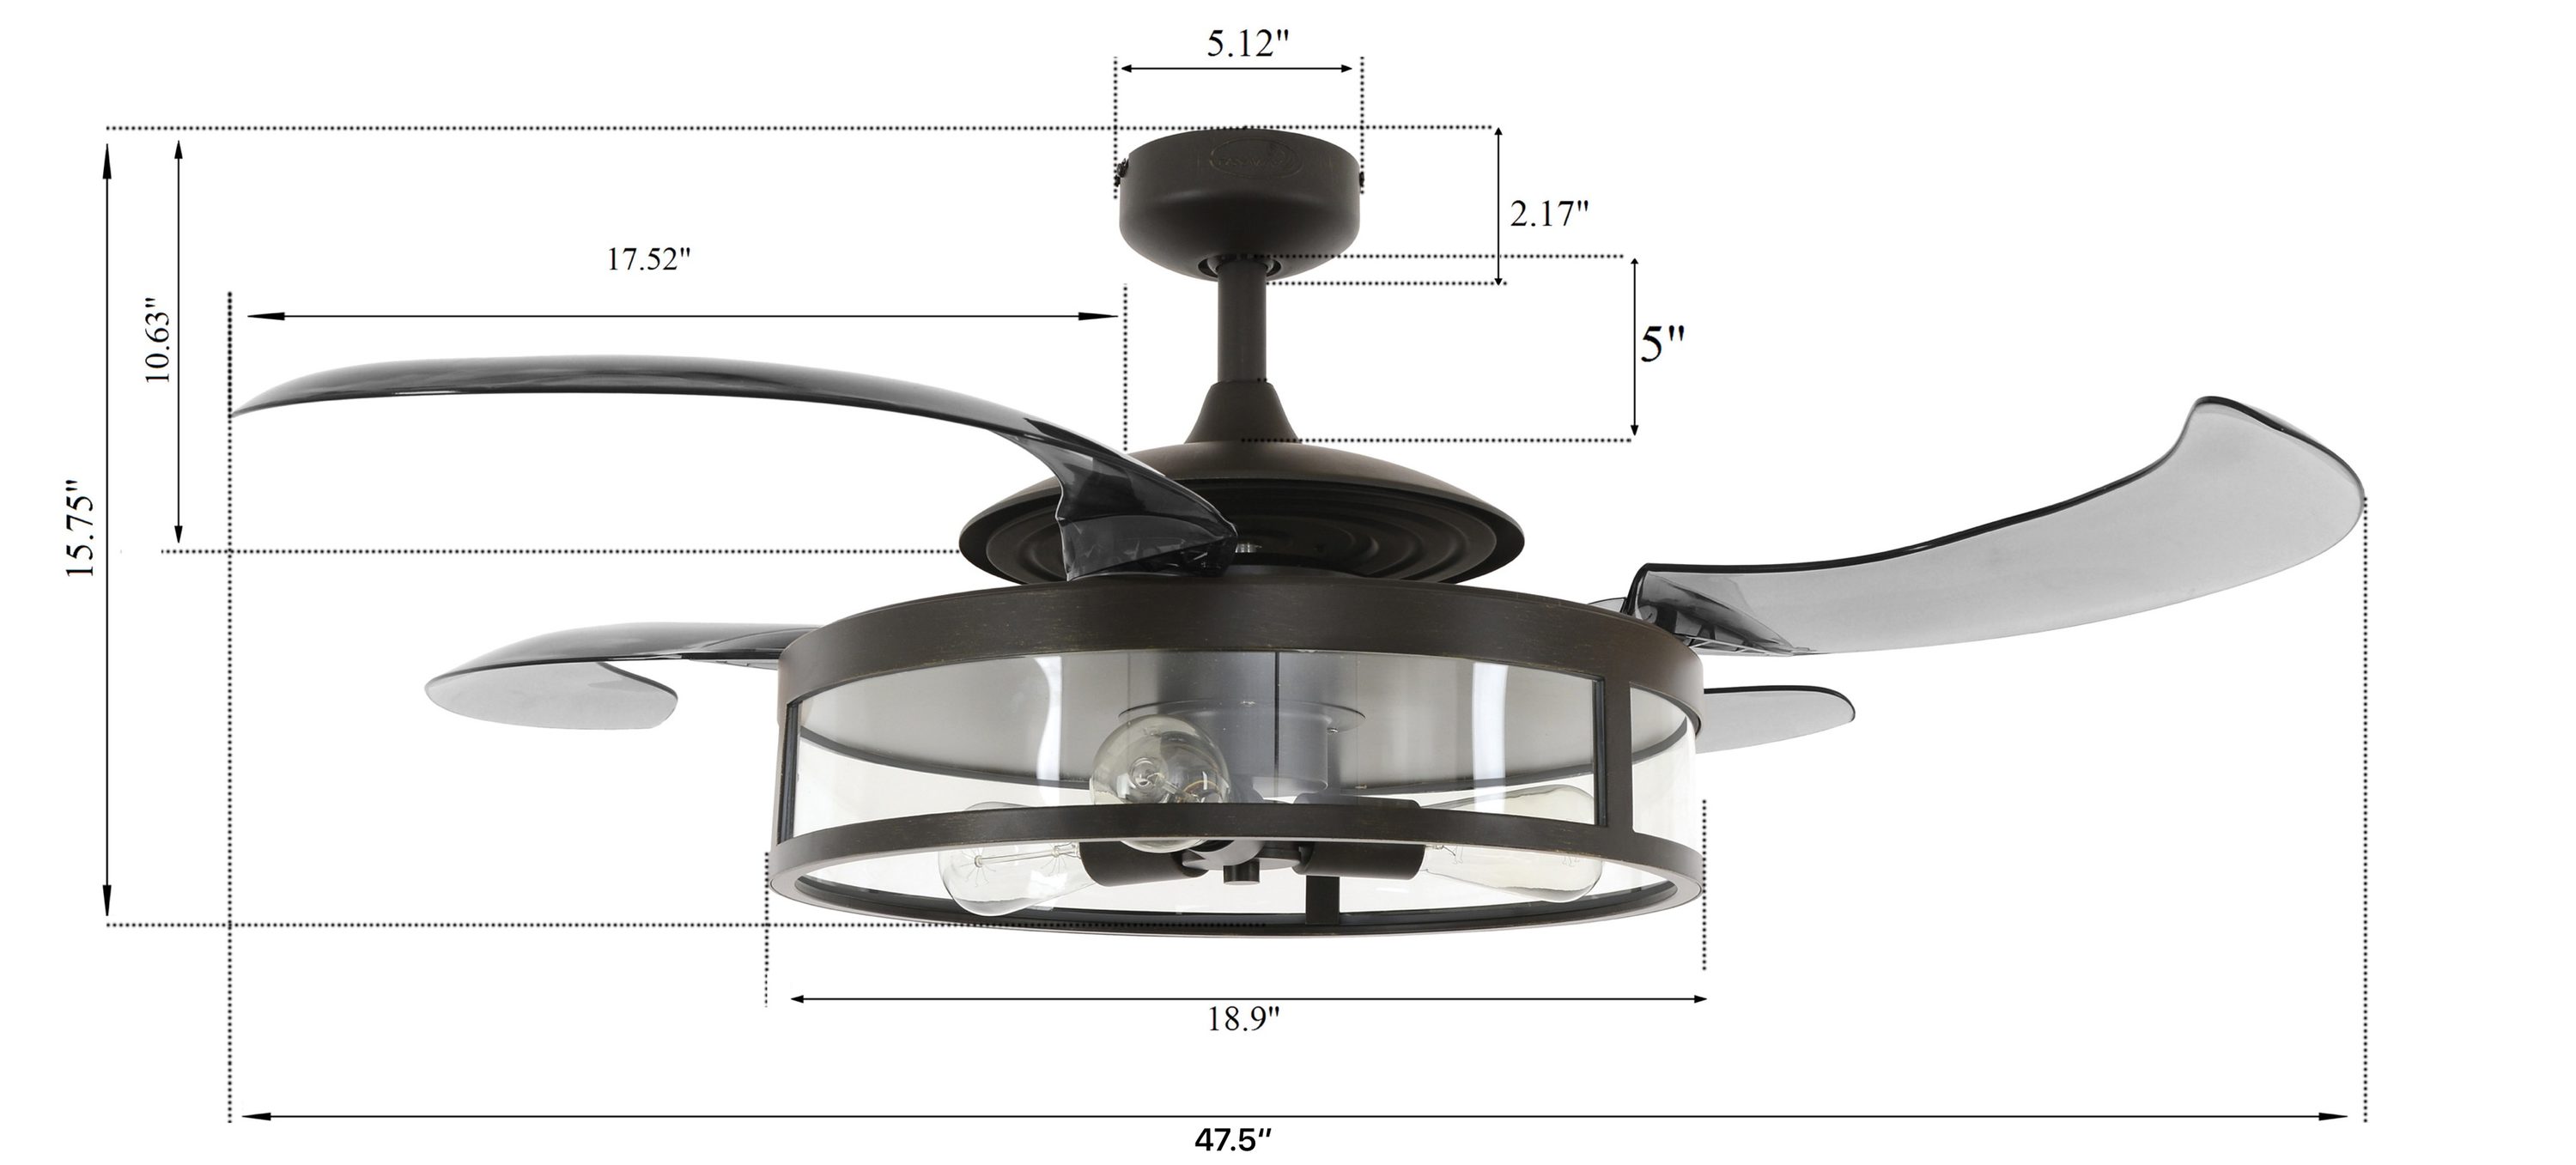 48" 5 Blades Ceiling Fan 3 Light 3 Speed Kit Antique Reversible Remote Control 